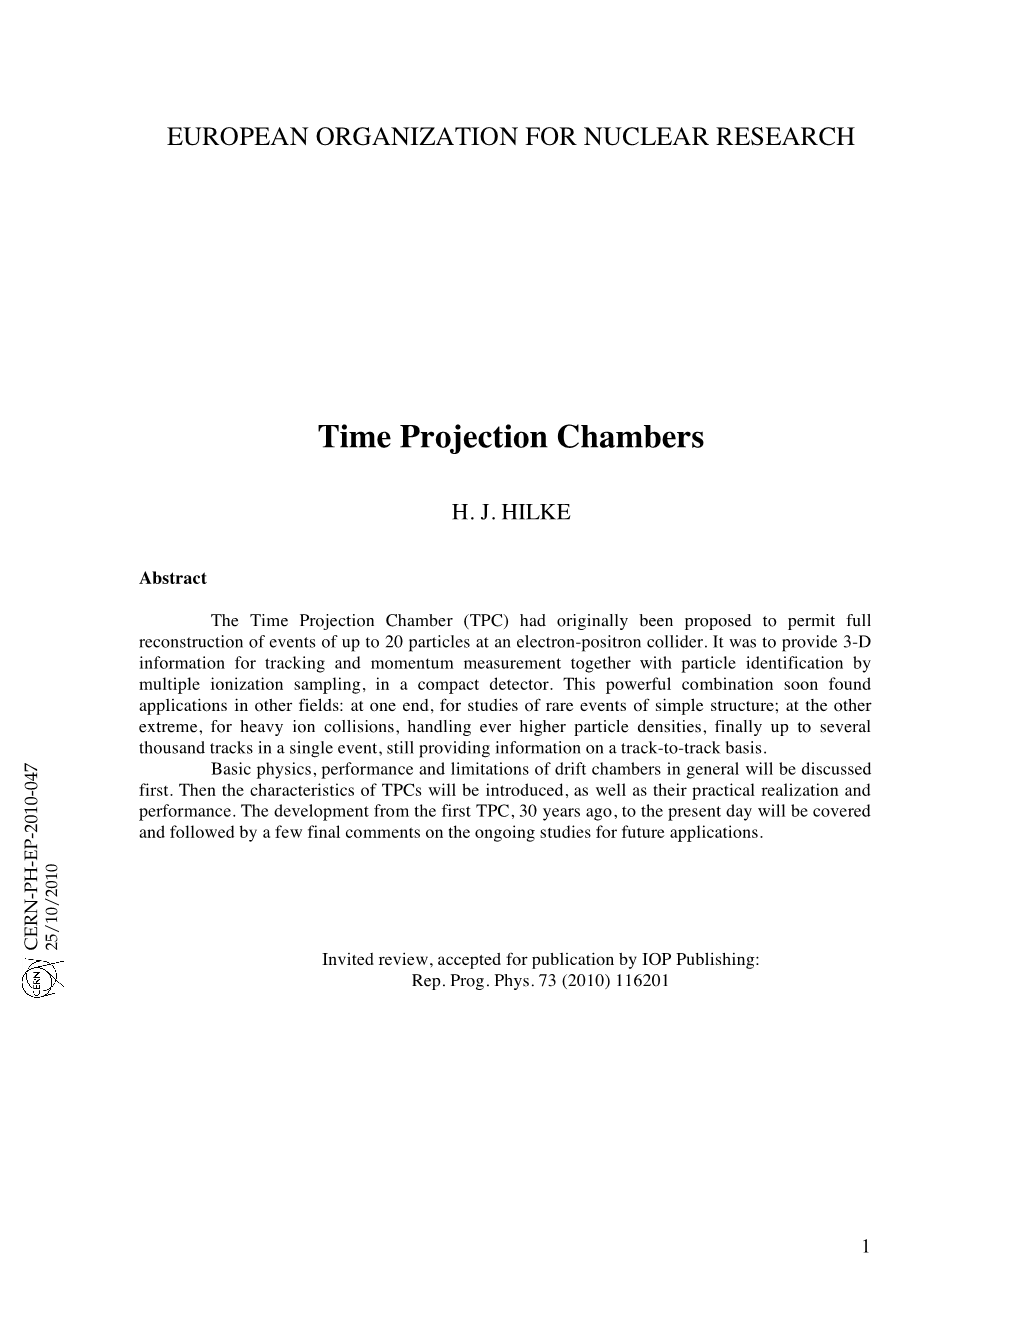 Time Projection Chambers